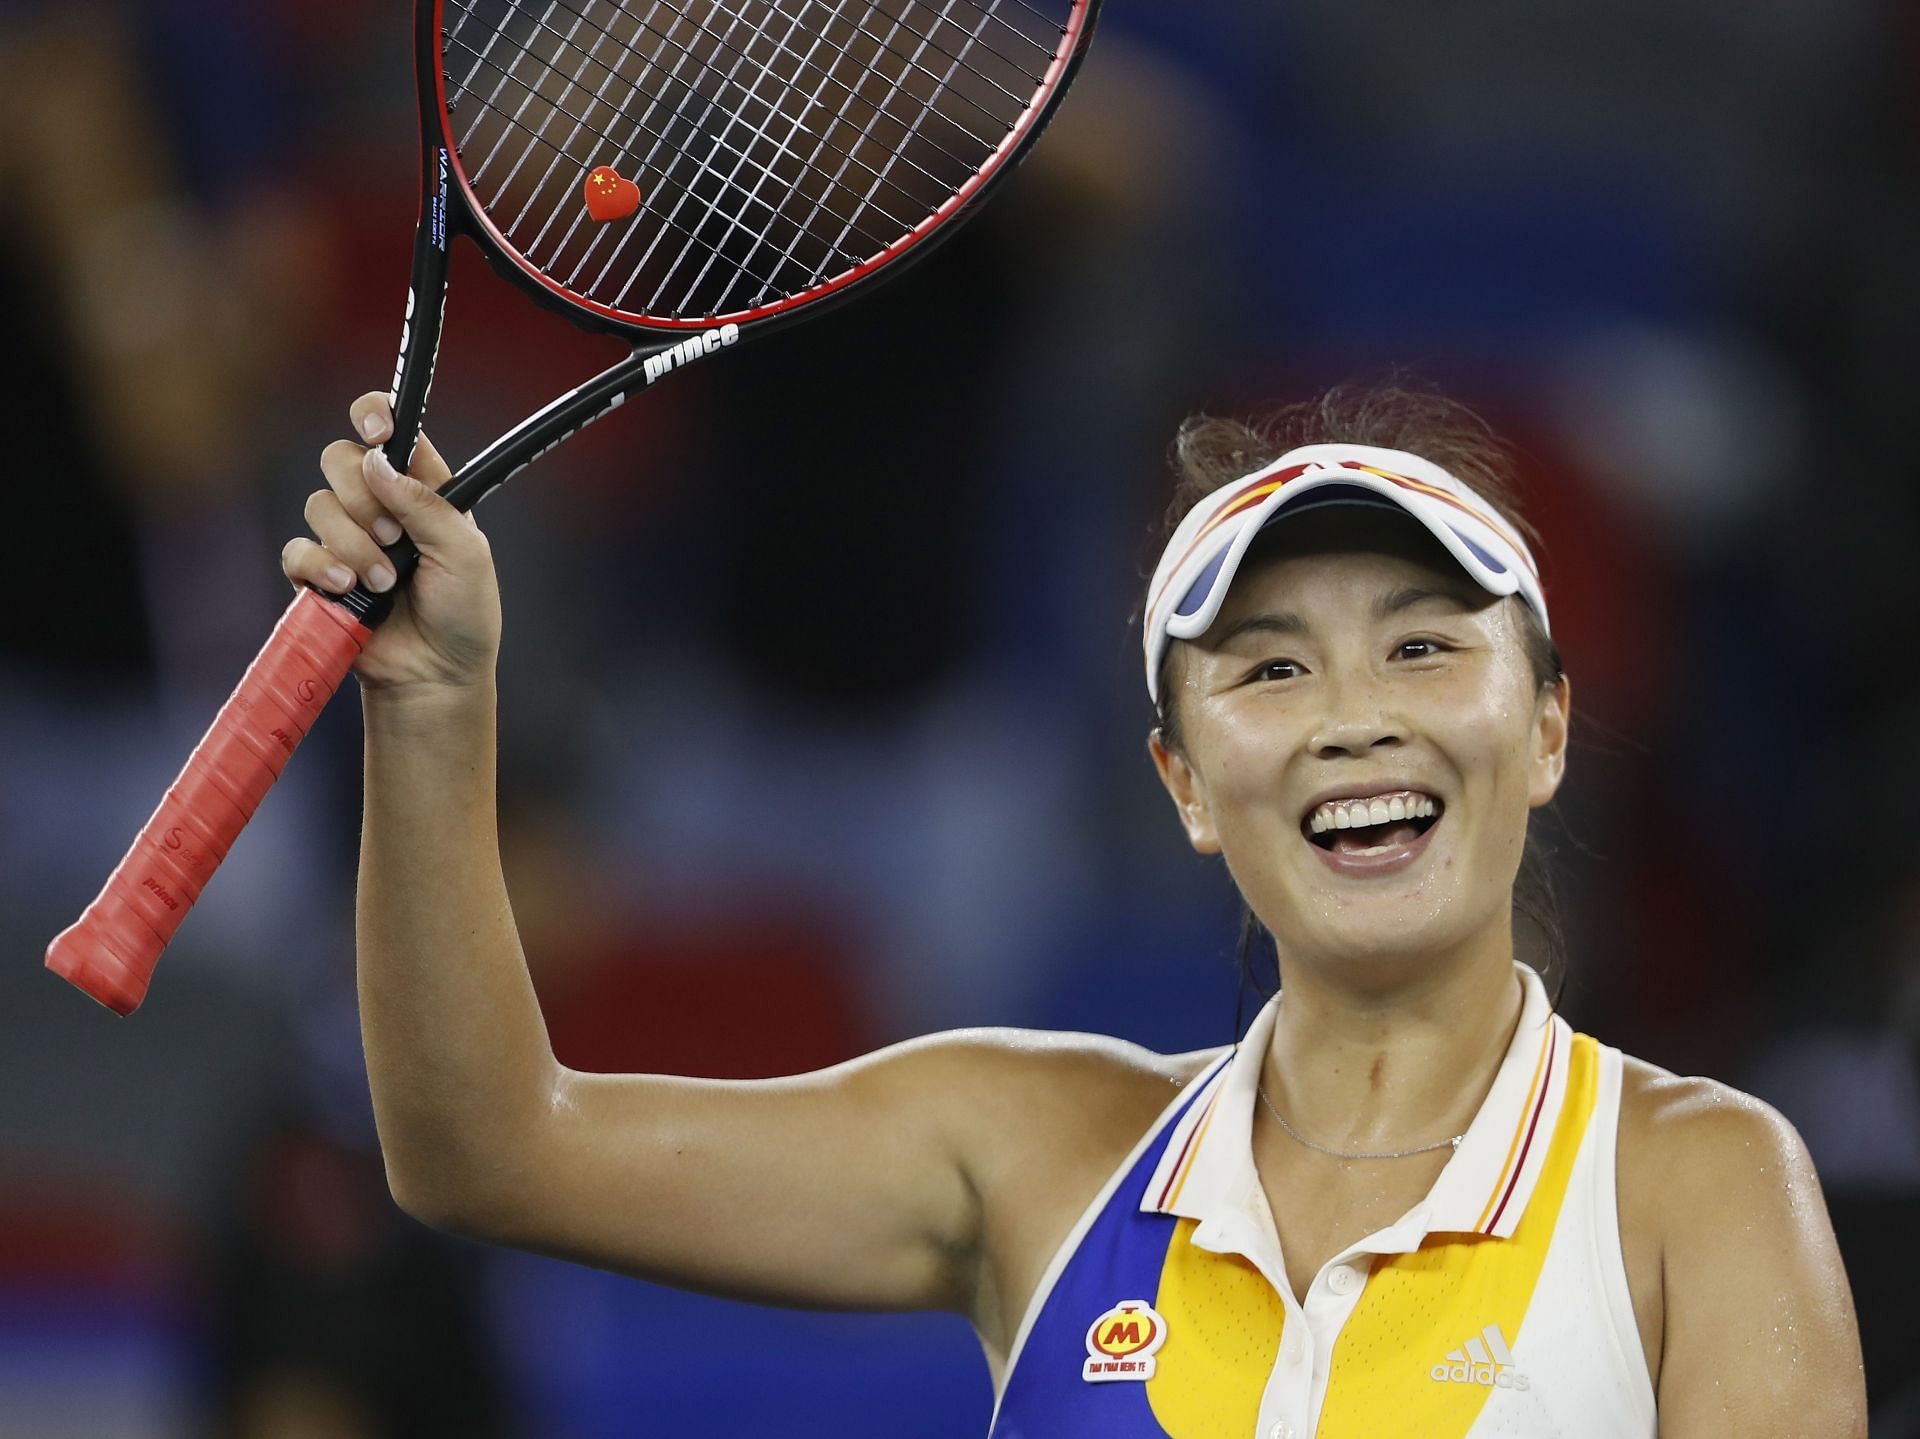 Peng Shuai was of the opinion that the WTA&#039;s statements were exaggerated